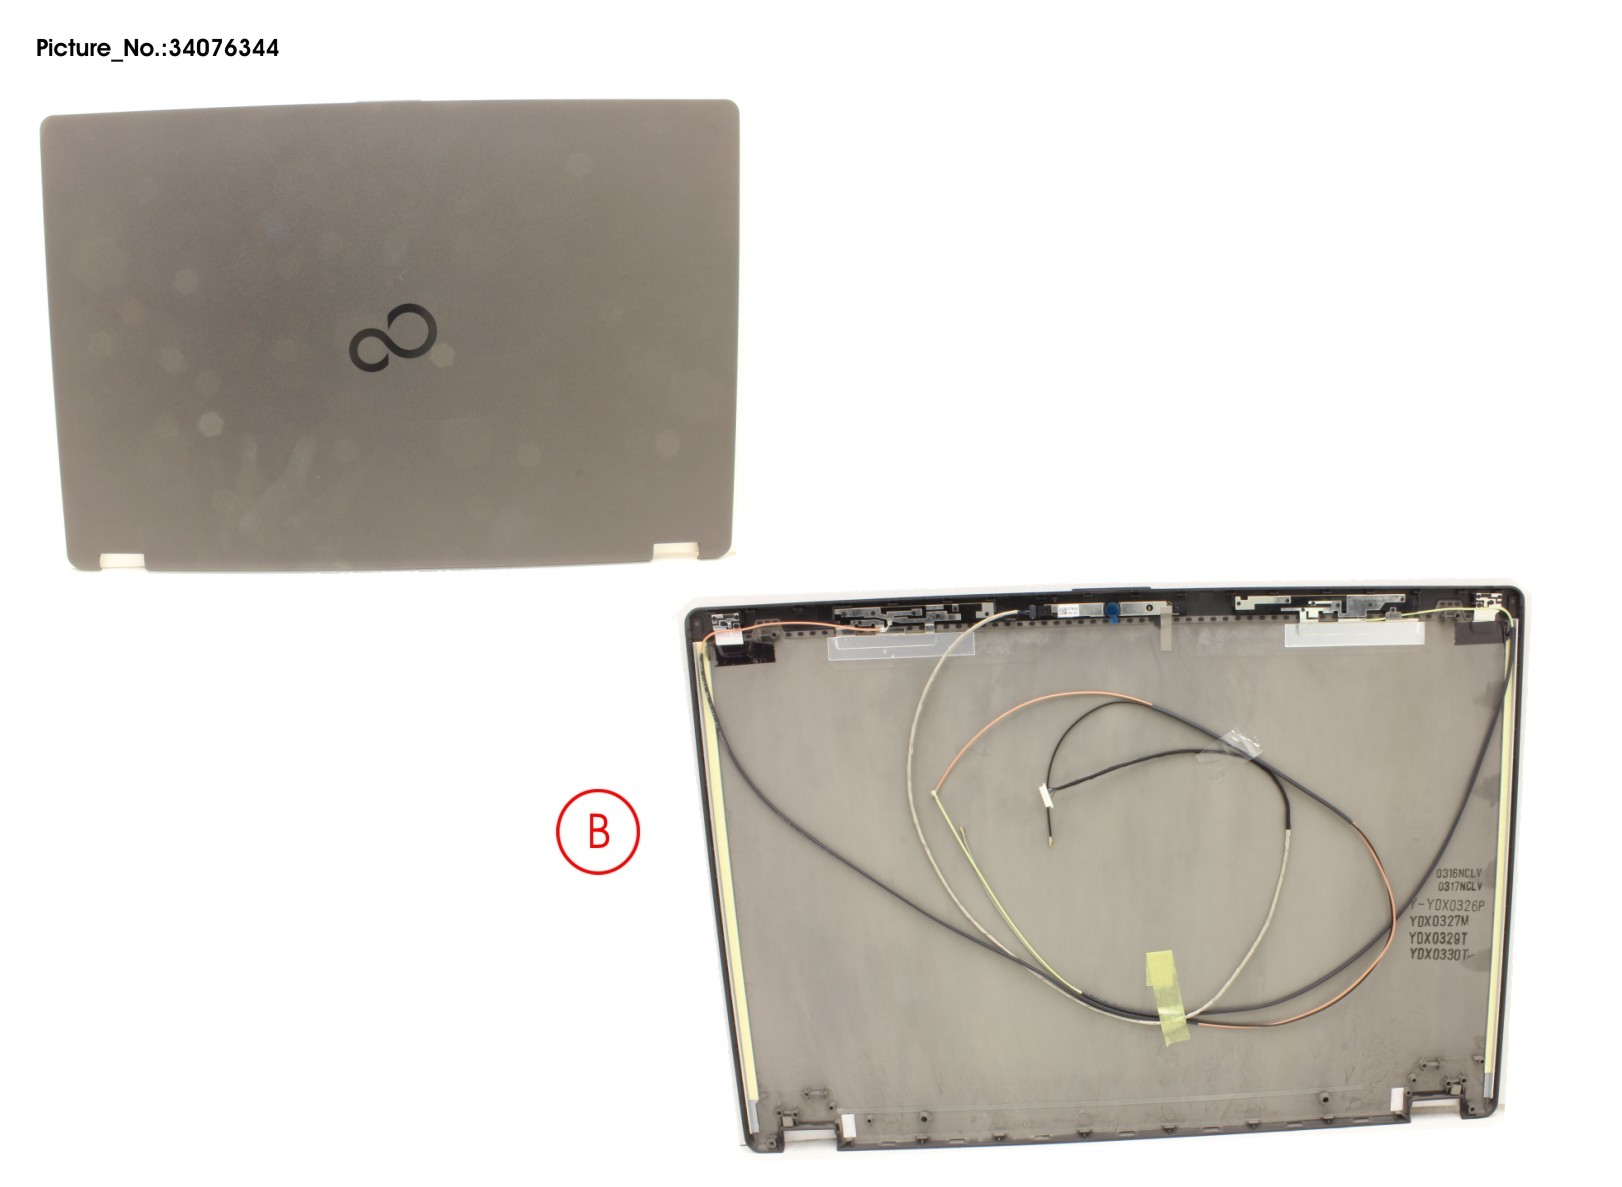 LCD BACK COVER ASSY (W/ RGB CAMERA)